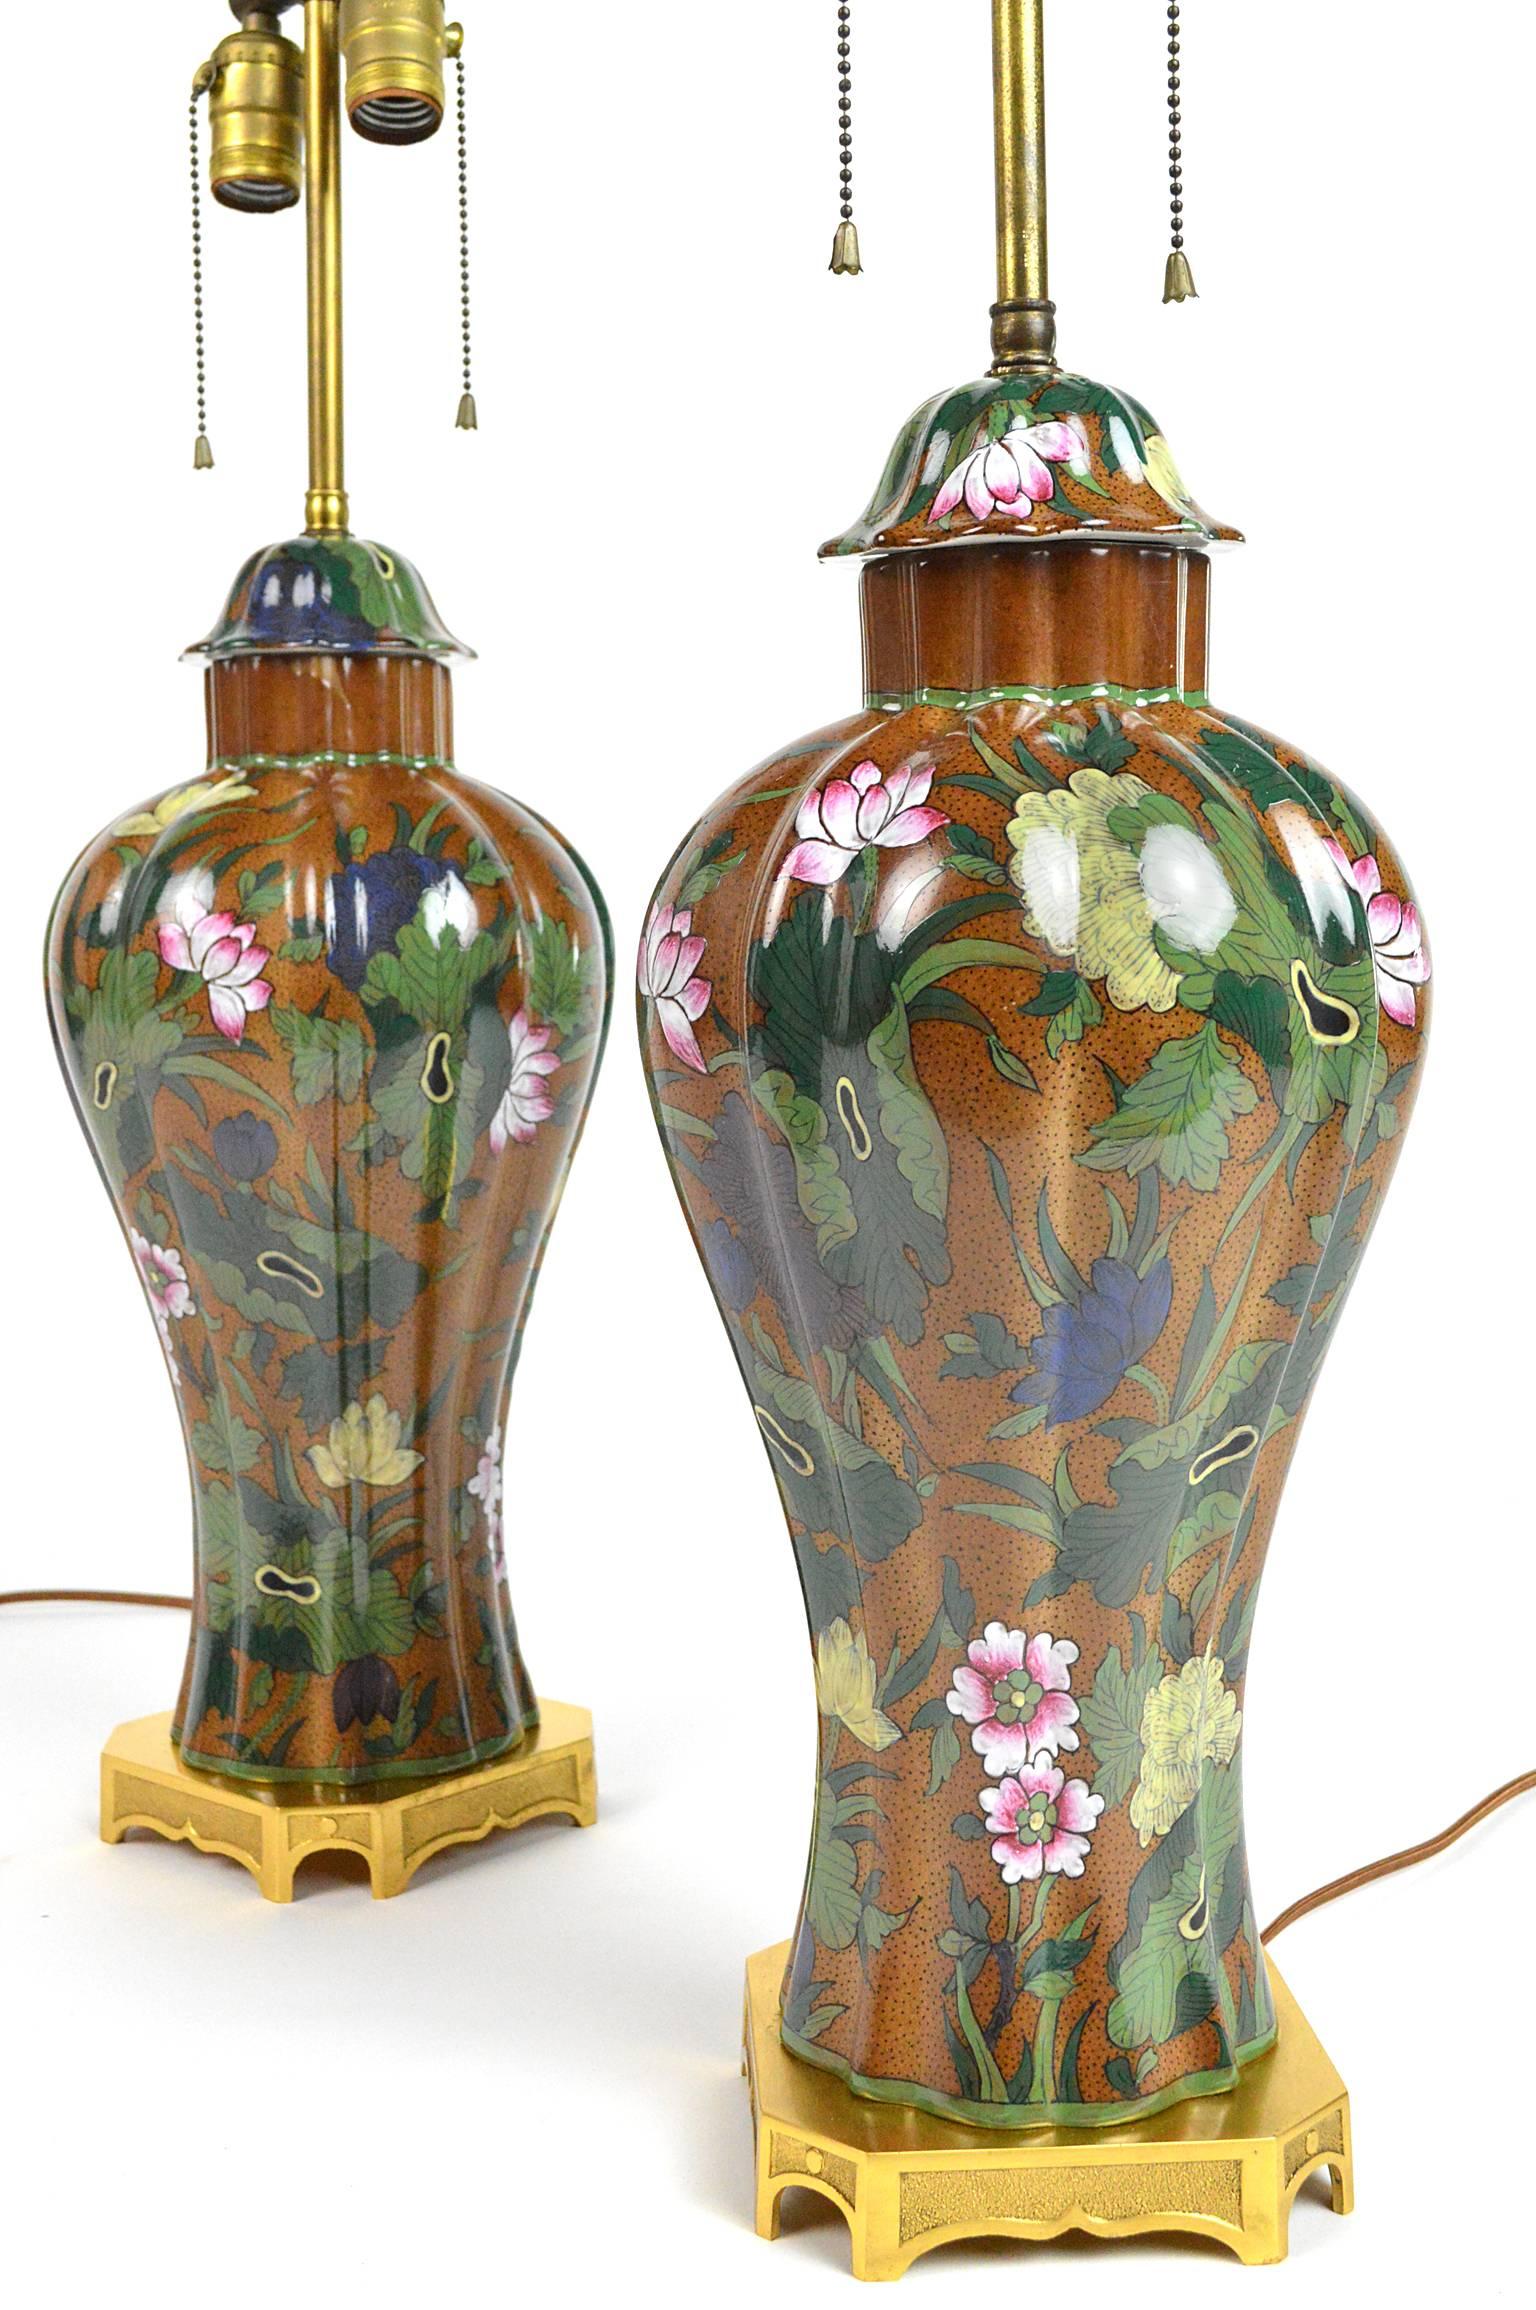 Pair of hand-painted French ginger jar form porcelain table lamps with floral decor each mounted on a gilt bronze base.
25.5